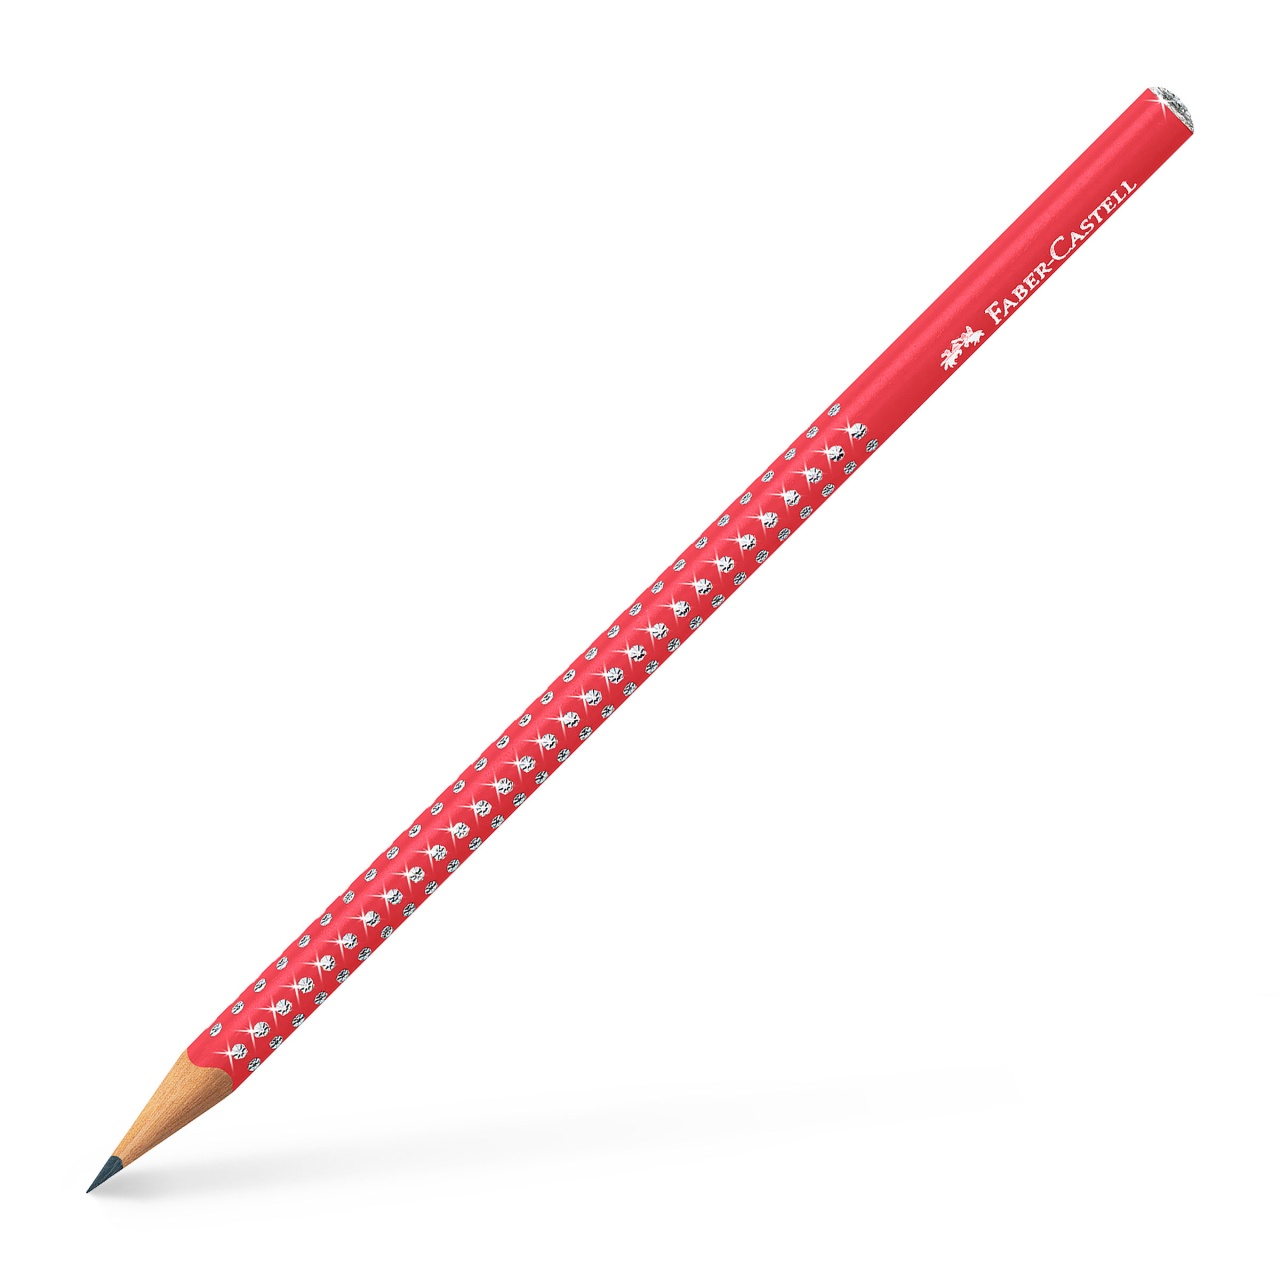 Faber-Castell Bleistift Sparkle candy cane red